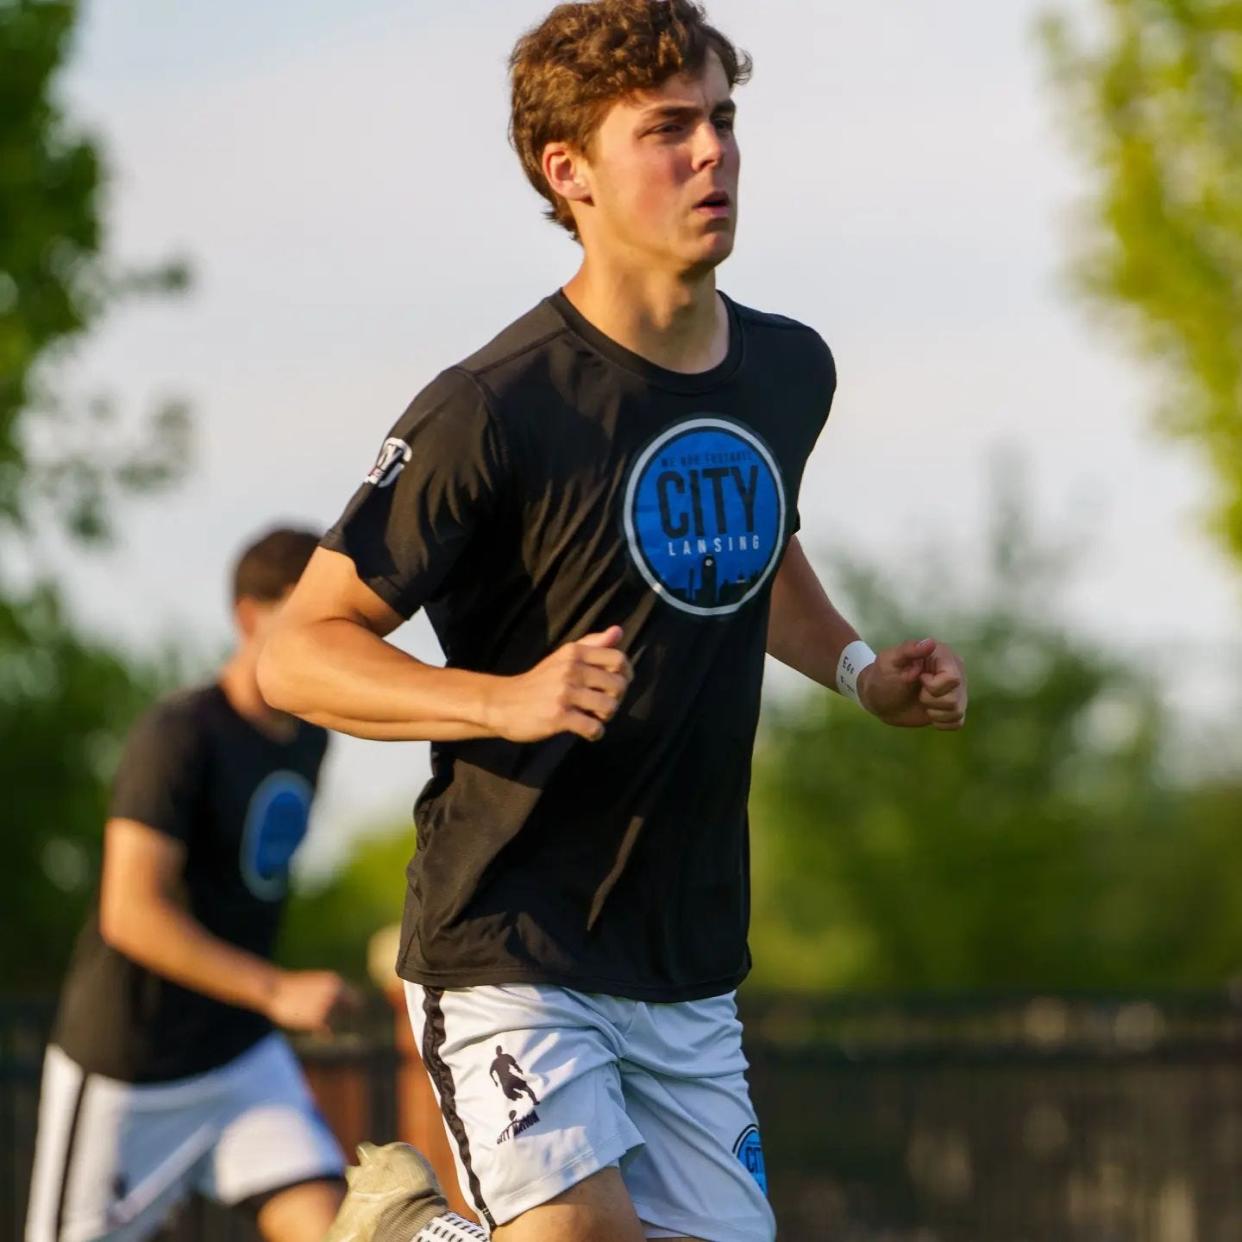 Okemos and MSU midfielder Jack Guggemos is expected to play a major role in Lansing City Football's squad this summer.